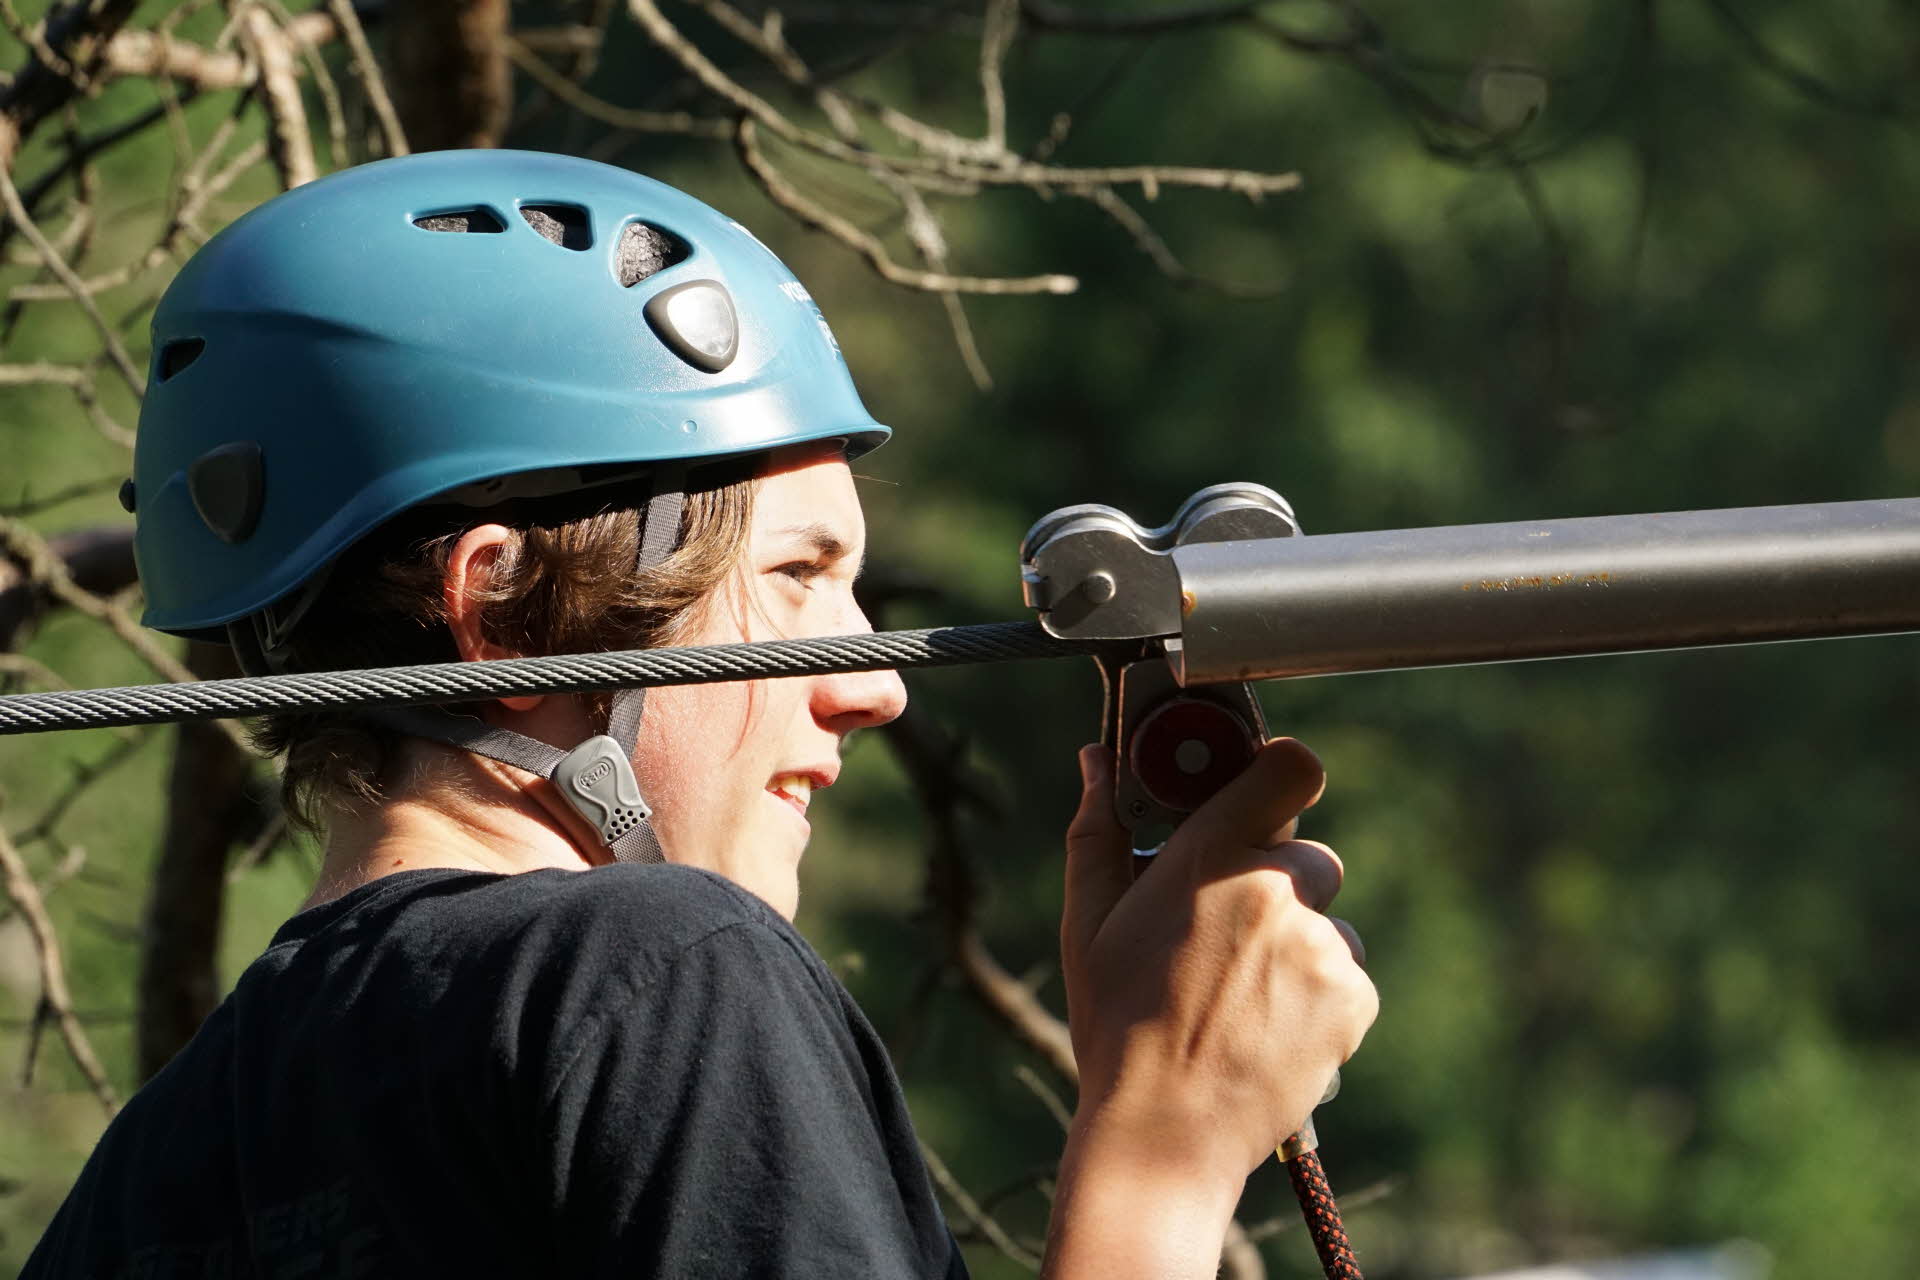 A boy in blue helmet holding on to safety equipment before setting off on a zipline